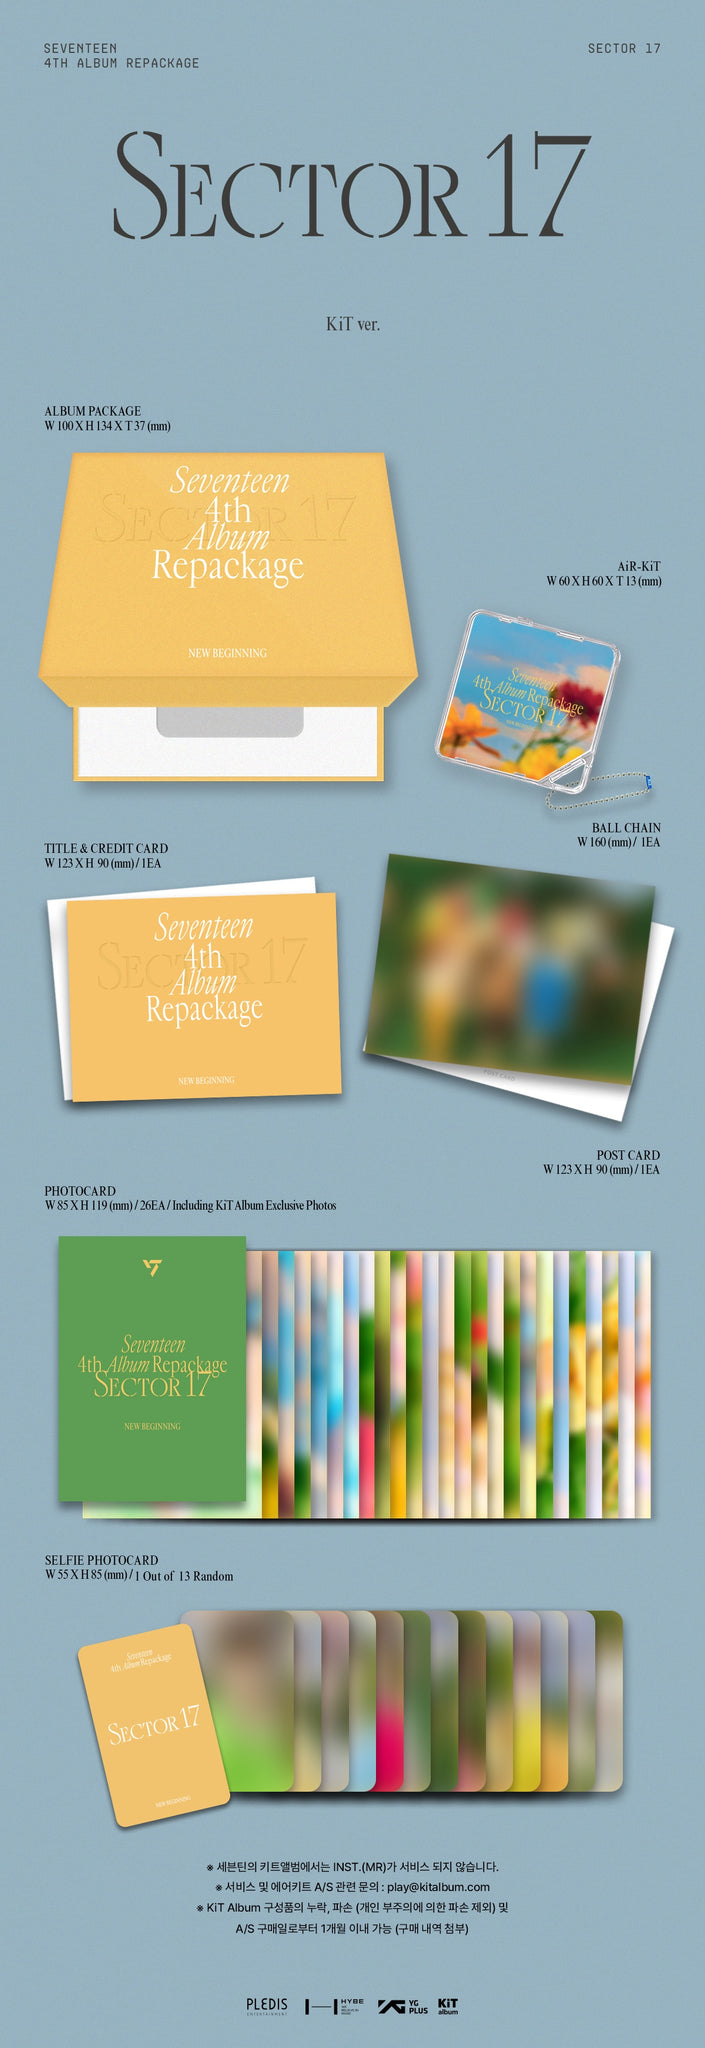 SEVENTEEN 4th Full Album Repackage SECTOR 17 (Reissue) - KiT Version Inclusions: Album Package, AiR-KiT, Title & Credit Card, Postcard, Photocard Set, Selfie Photocard